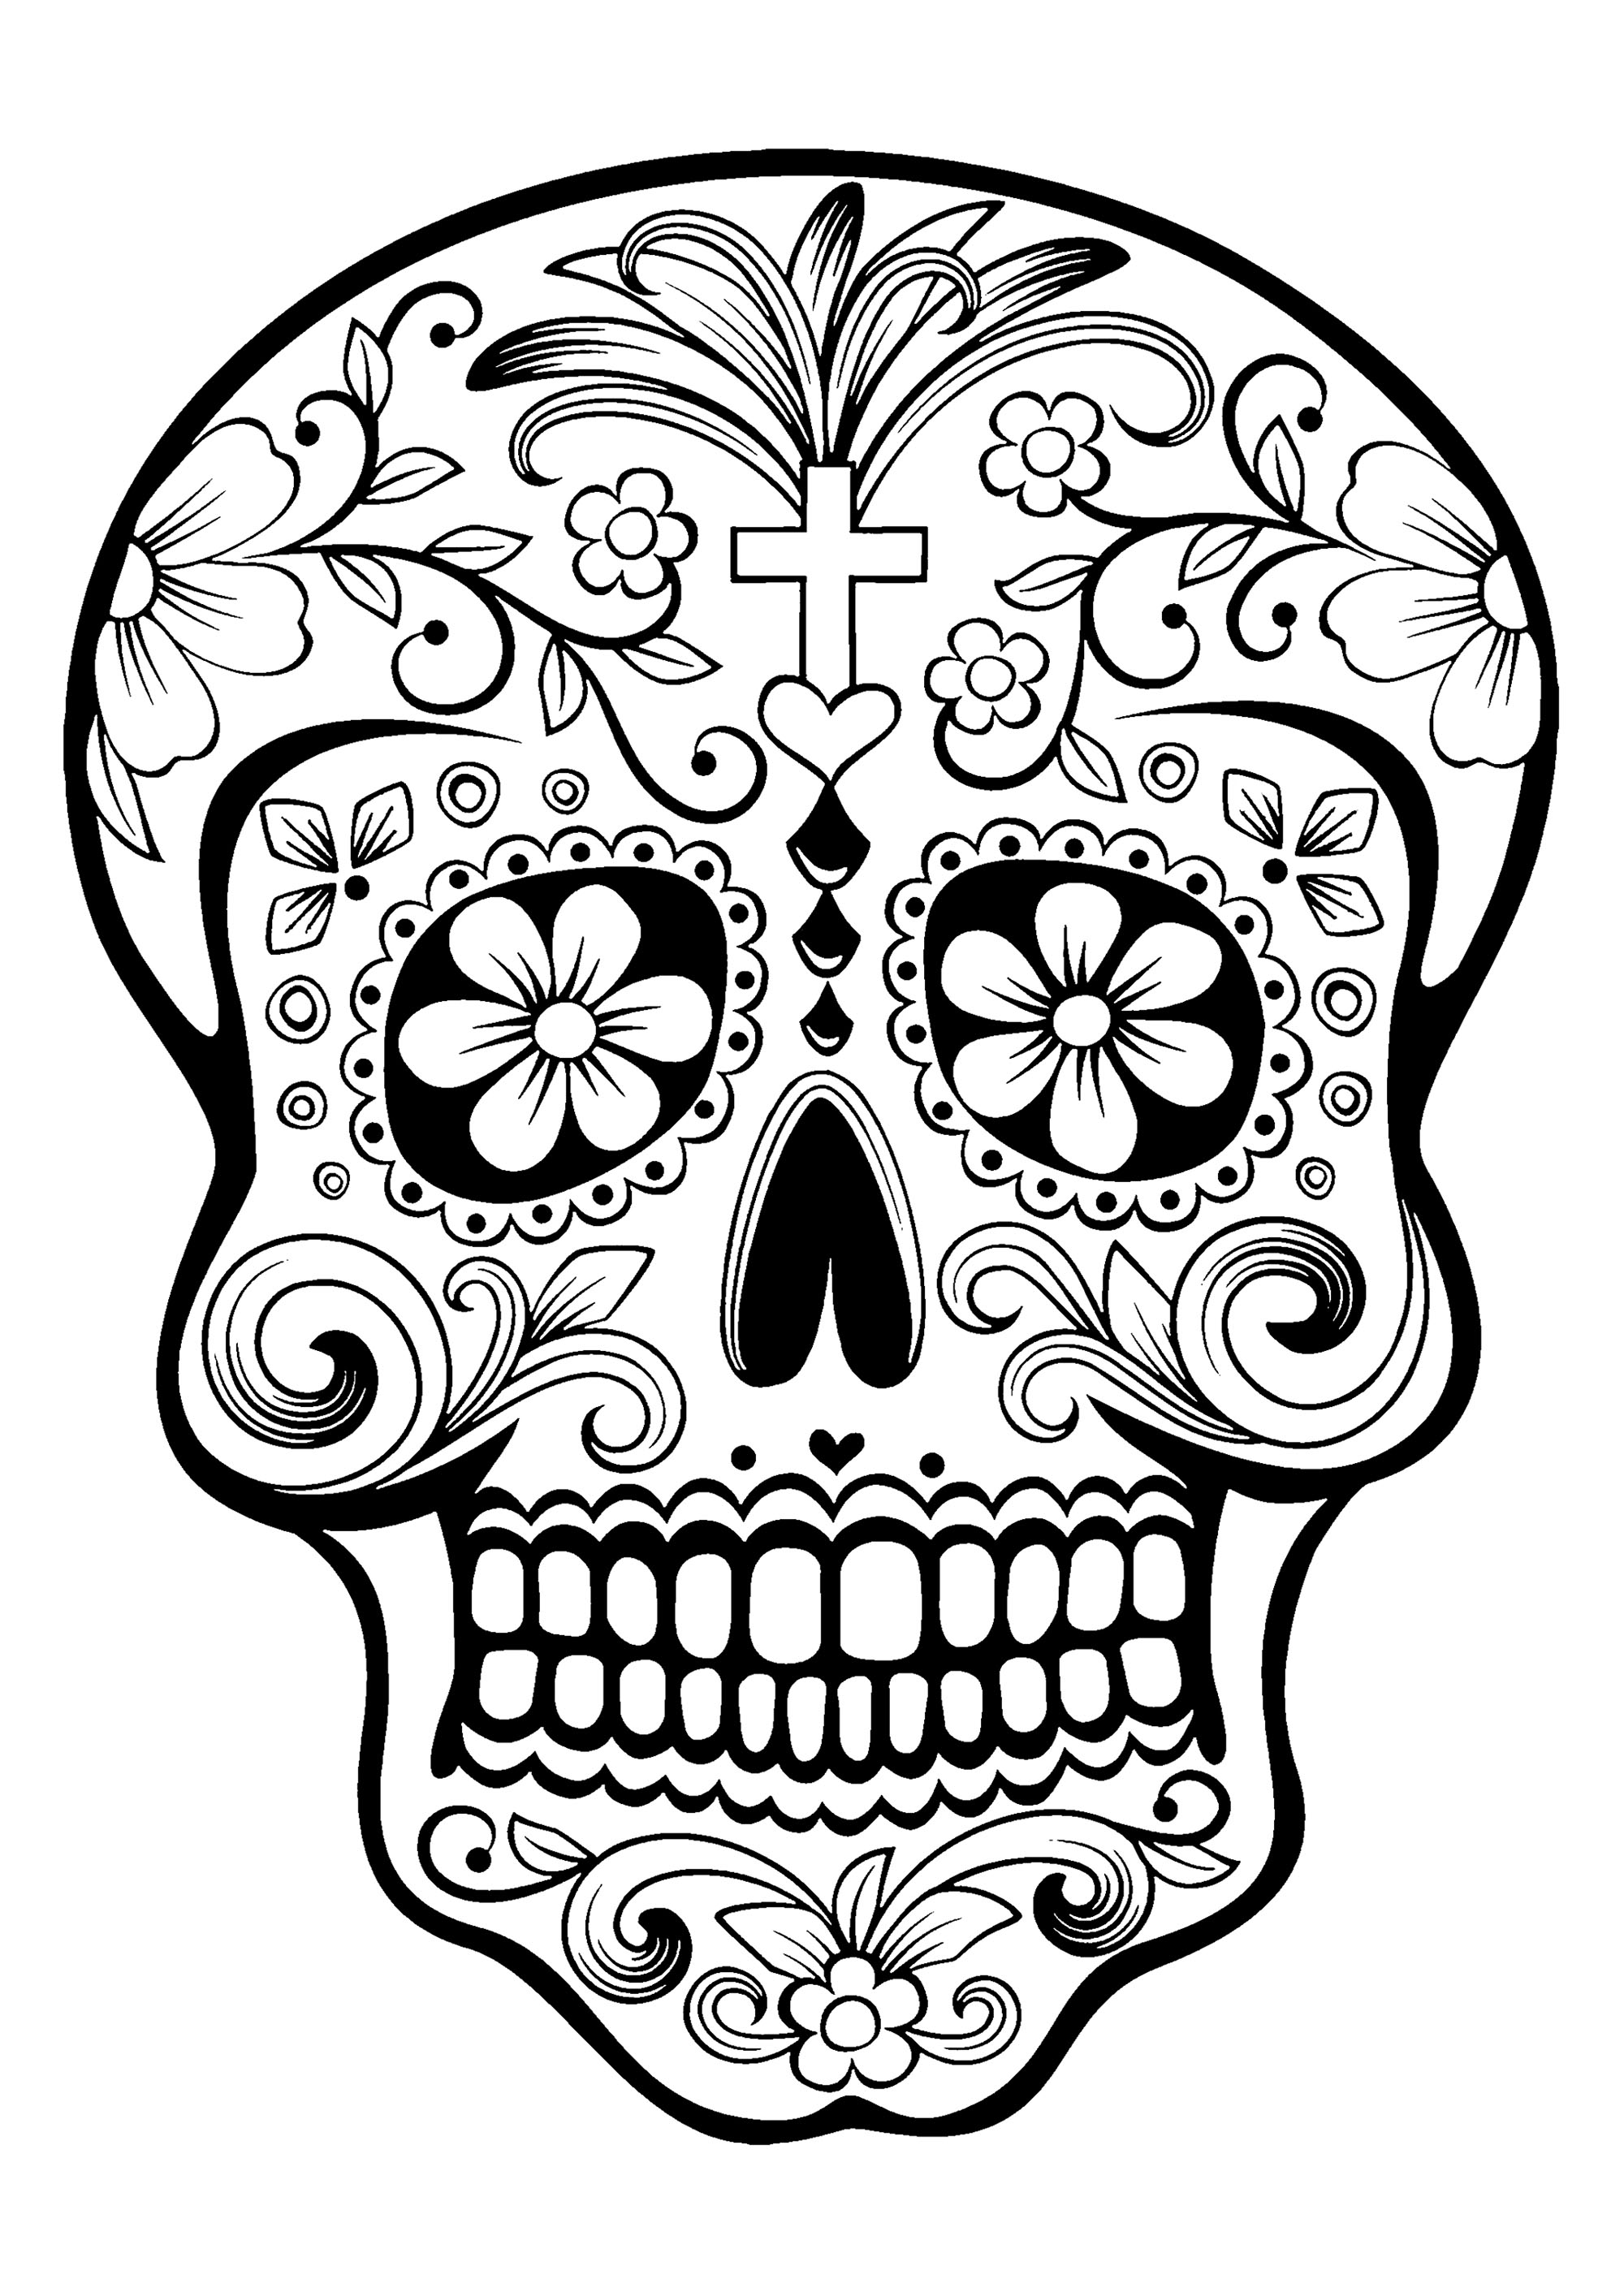 skull-coloring-pages-for-adults